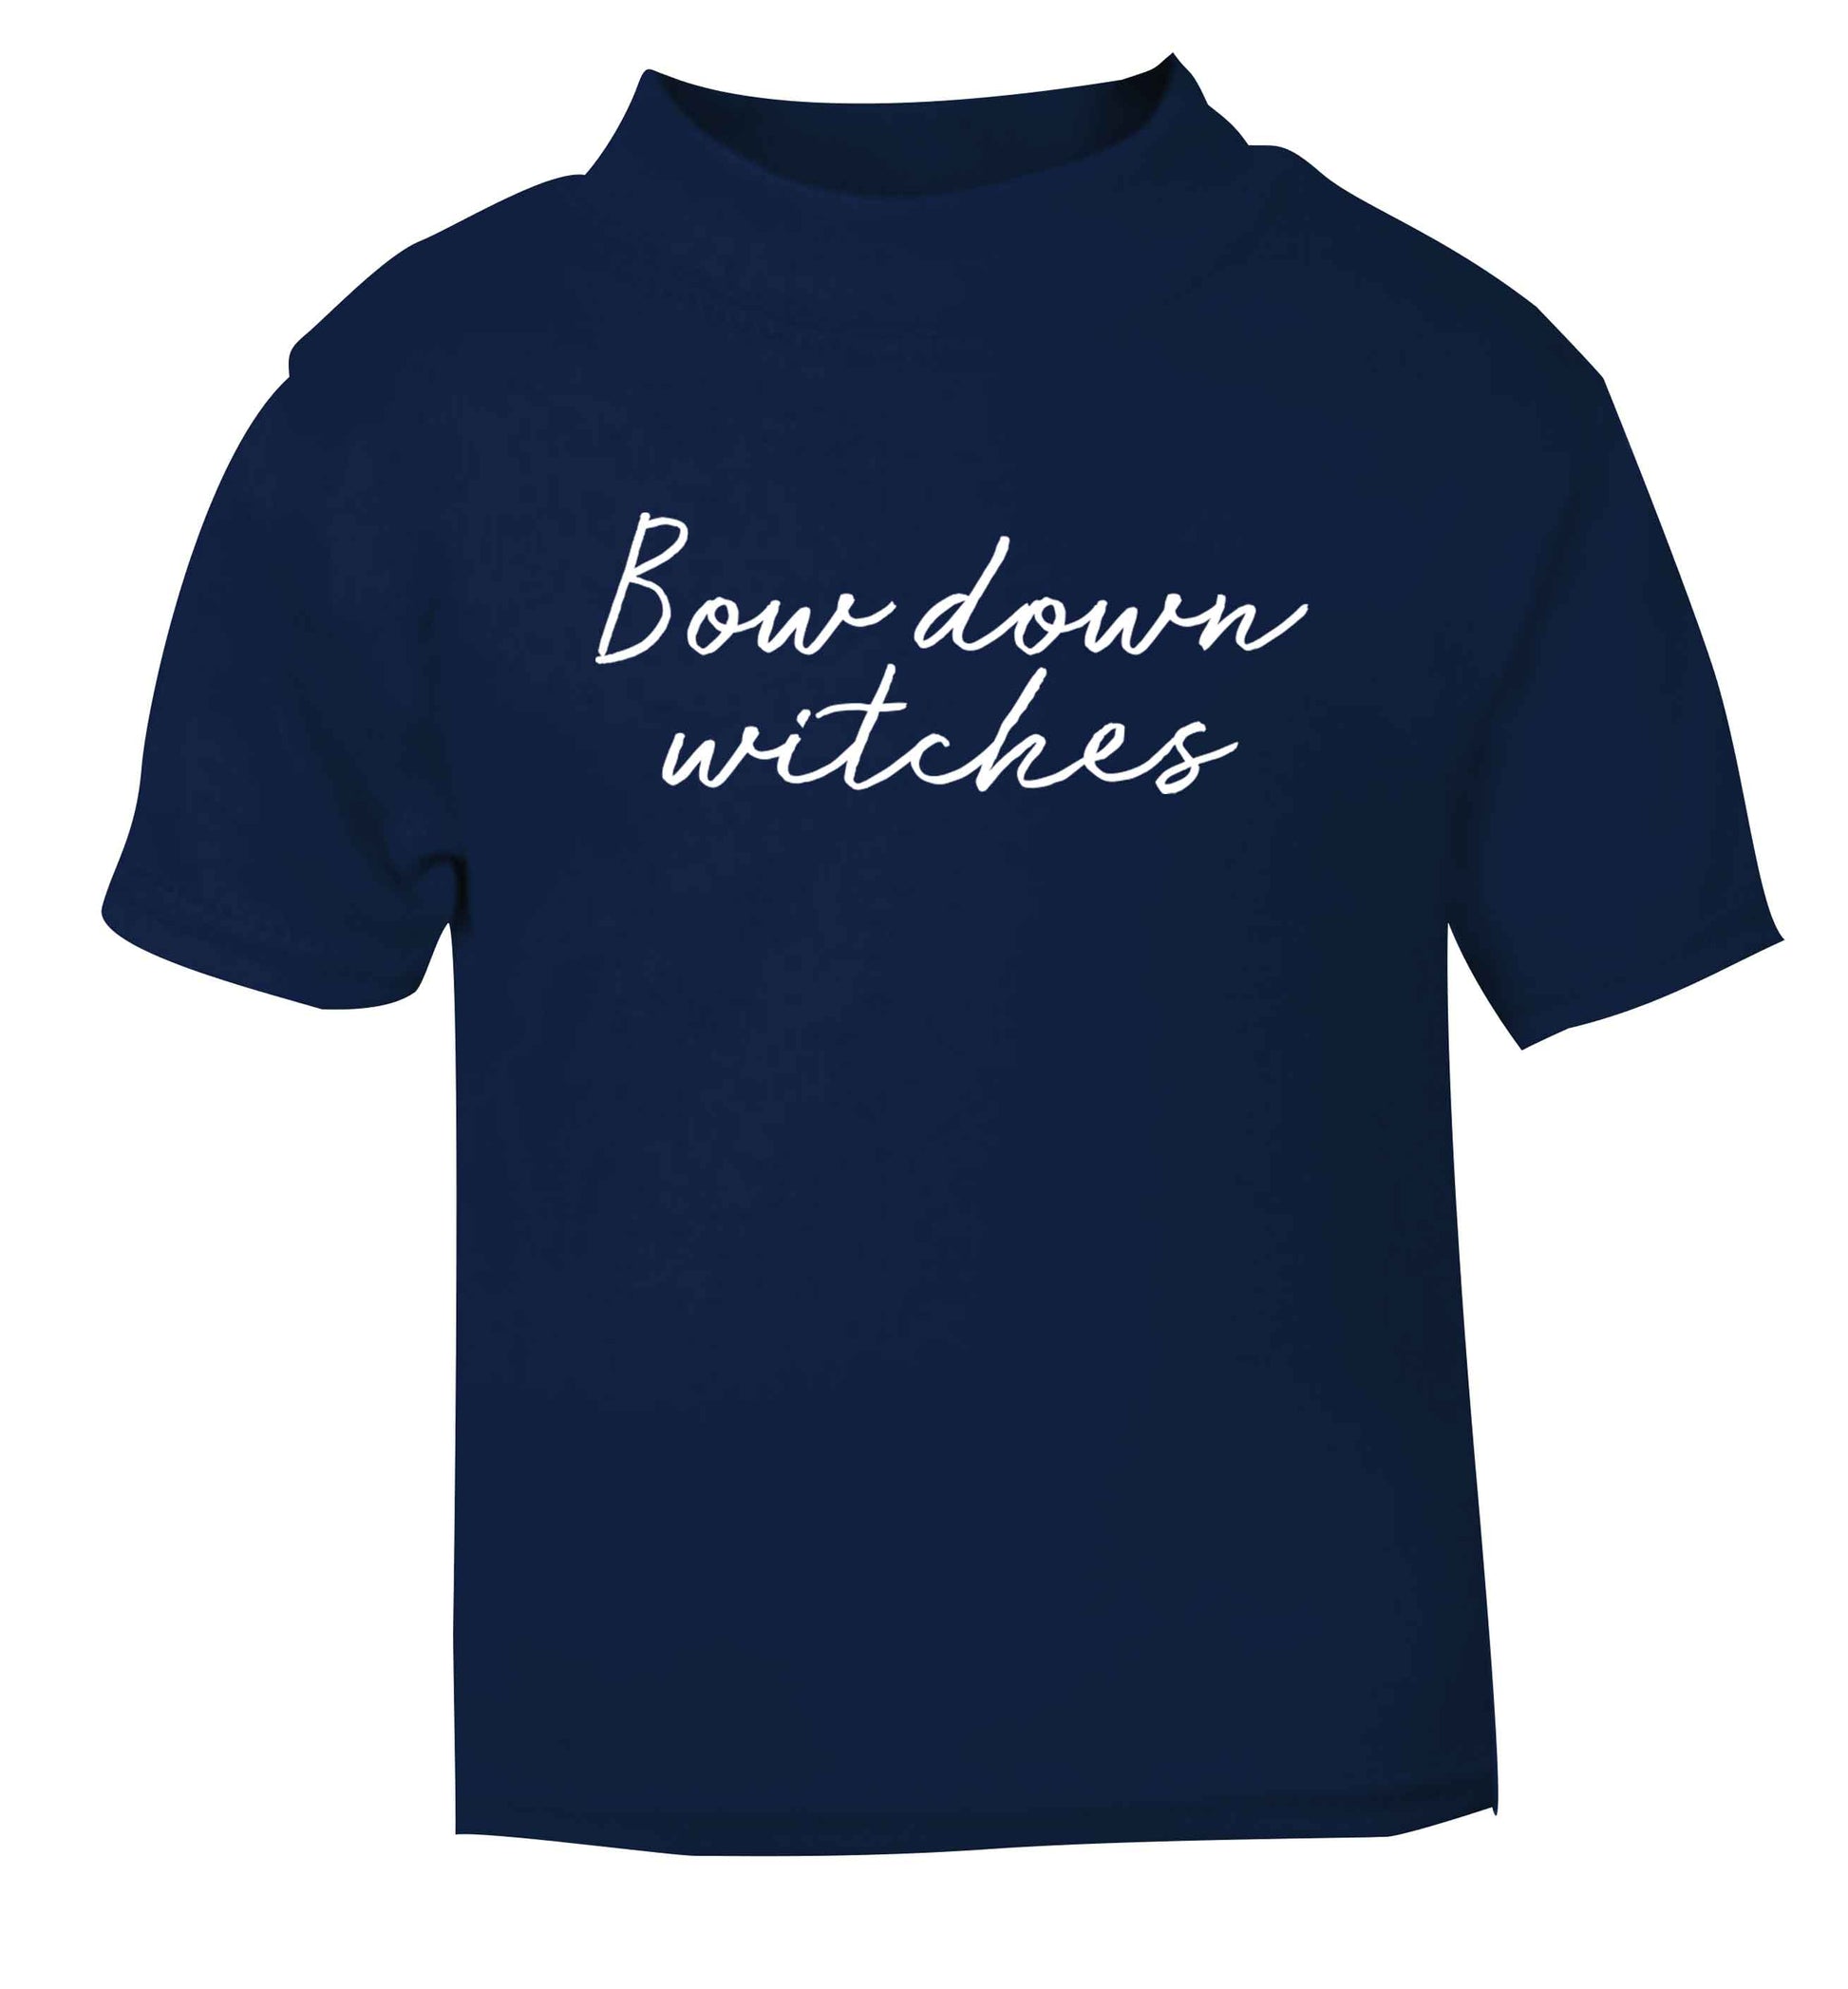 Bow down witches navy baby toddler Tshirt 2 Years